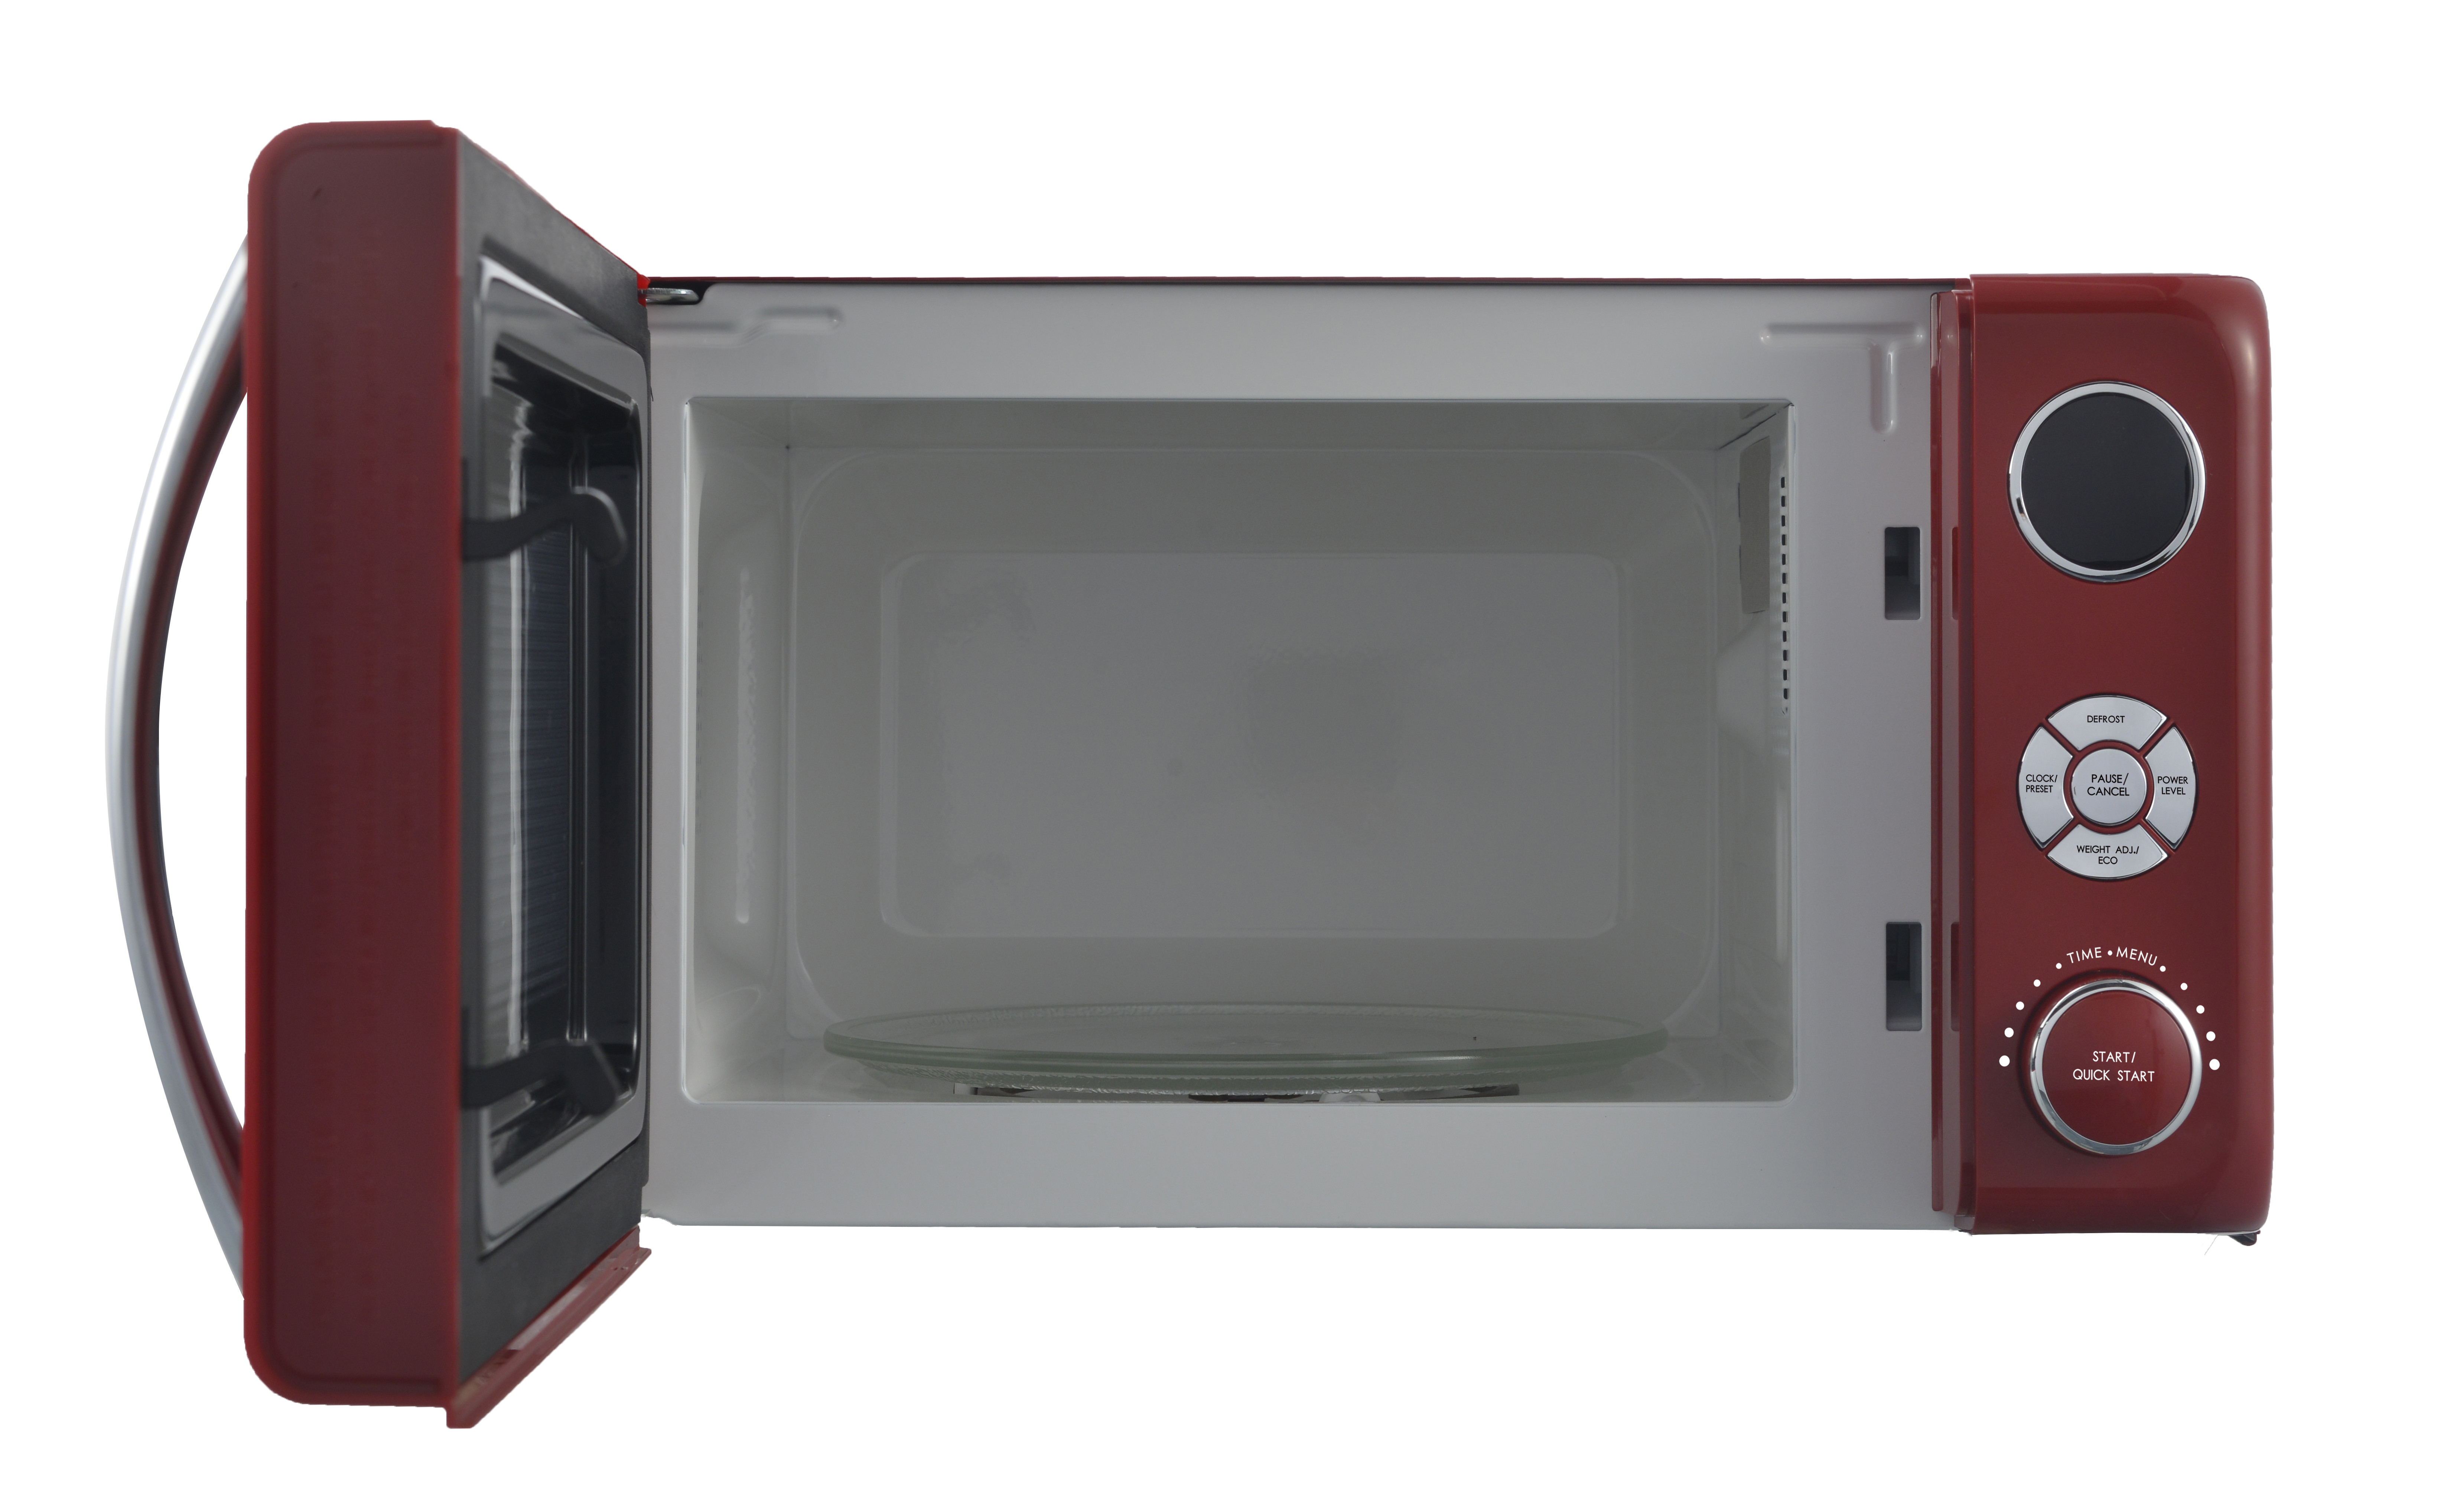 Galanz GLCMKA07RDR-07 0.7 Cu.ft Retro Countertop Microwave 700W, Red - image 2 of 4